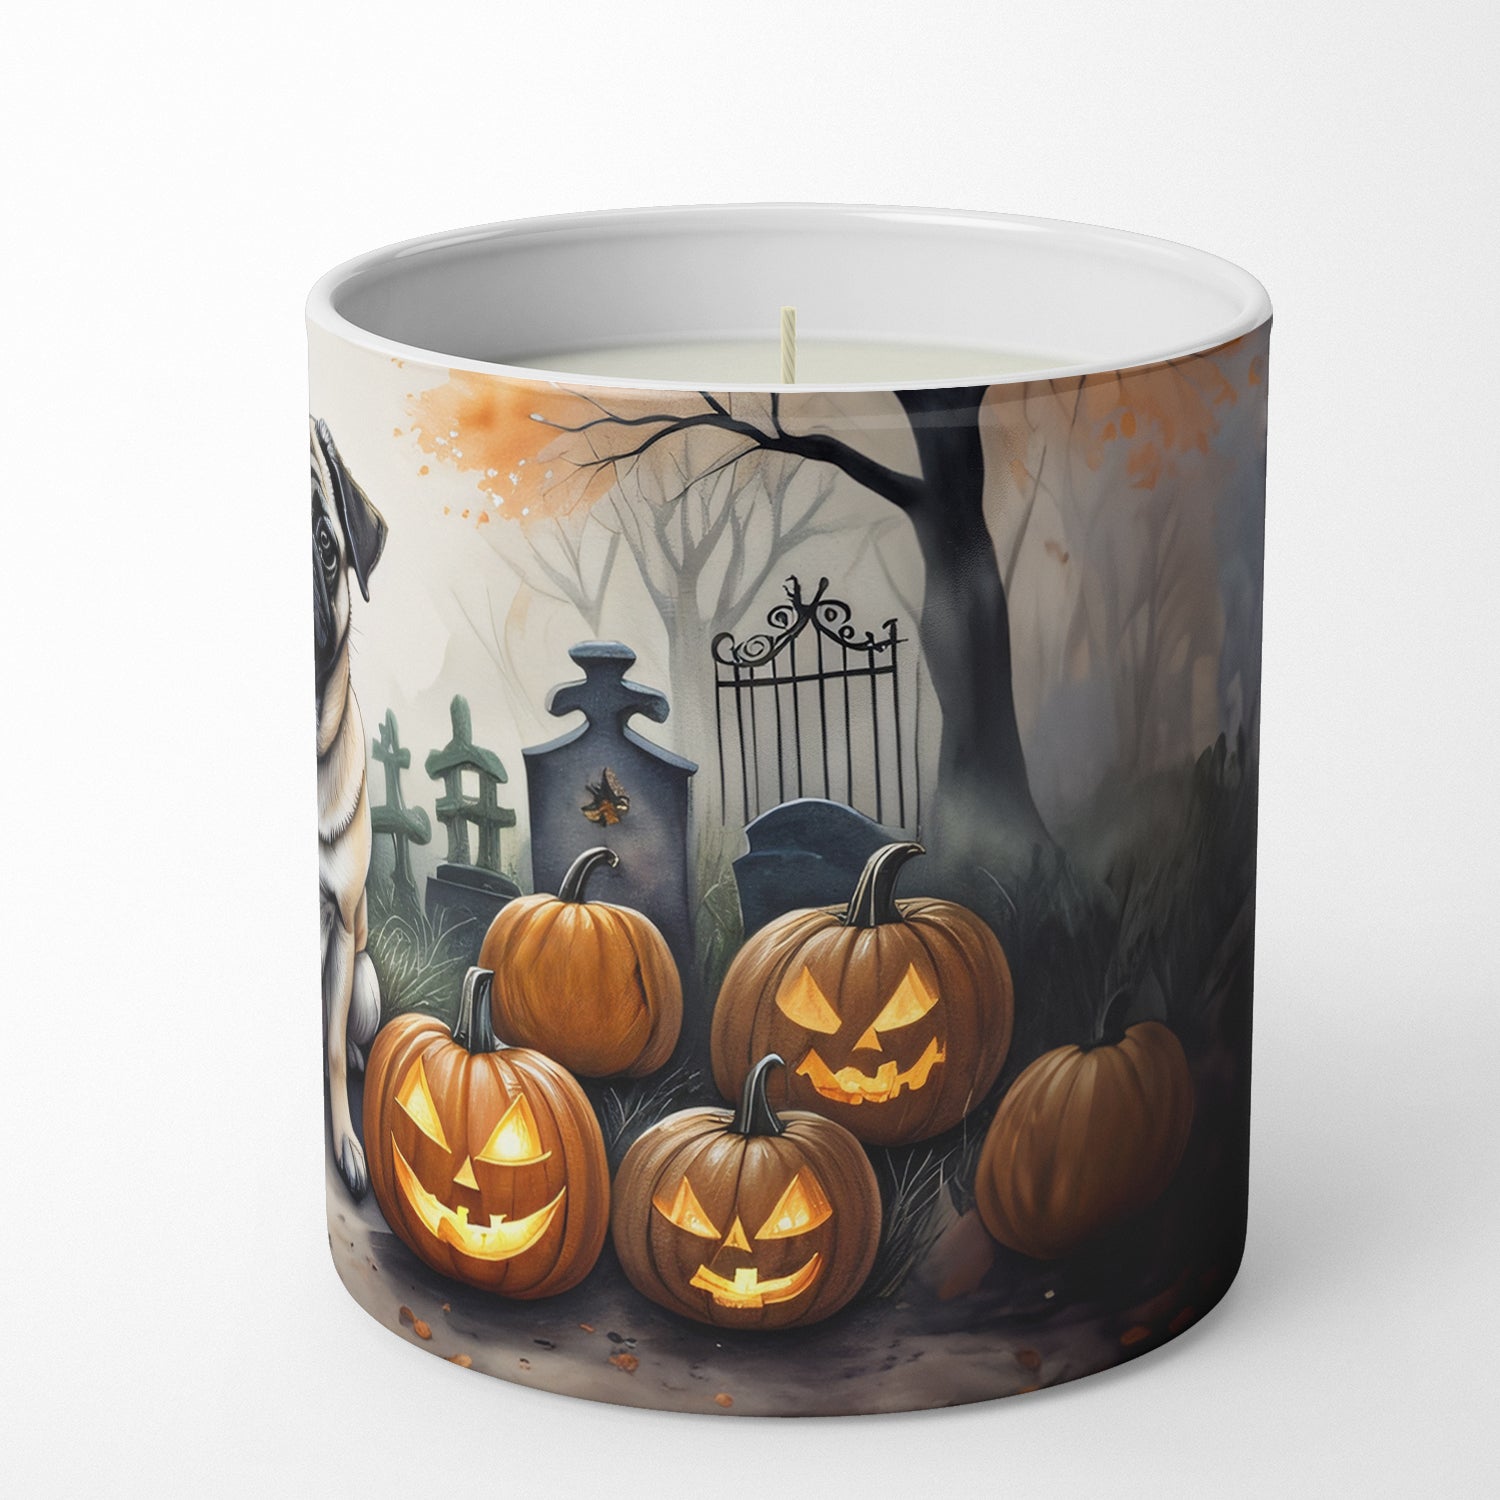 Fawn Pug Spooky Halloween Decorative Soy Candle